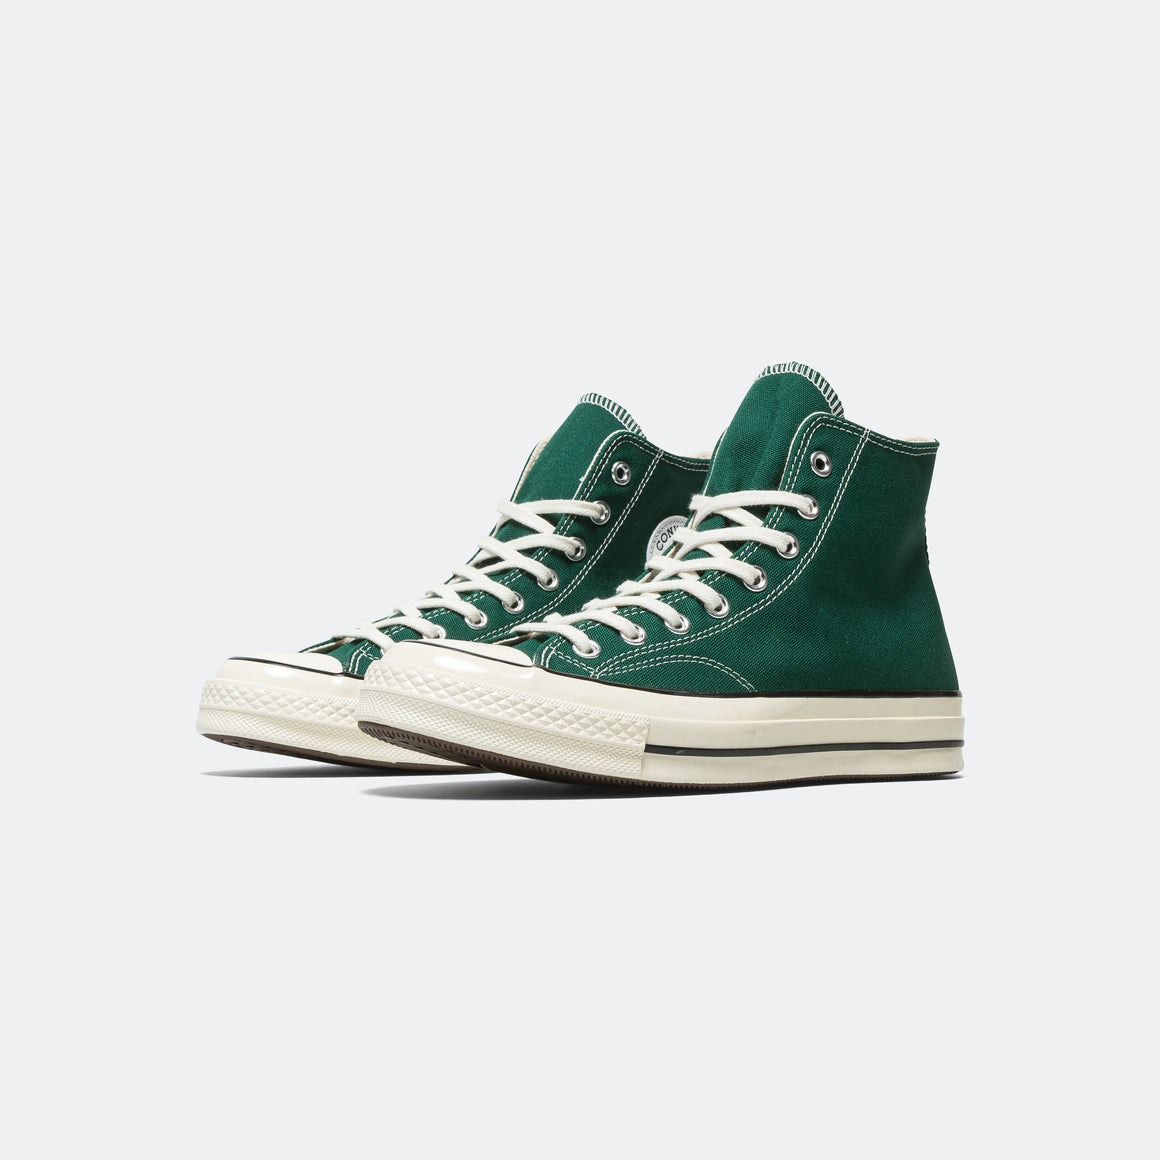 Converse - CT 70 Vintage Canvas Hi - Midnight Clover/Black - UP THERE